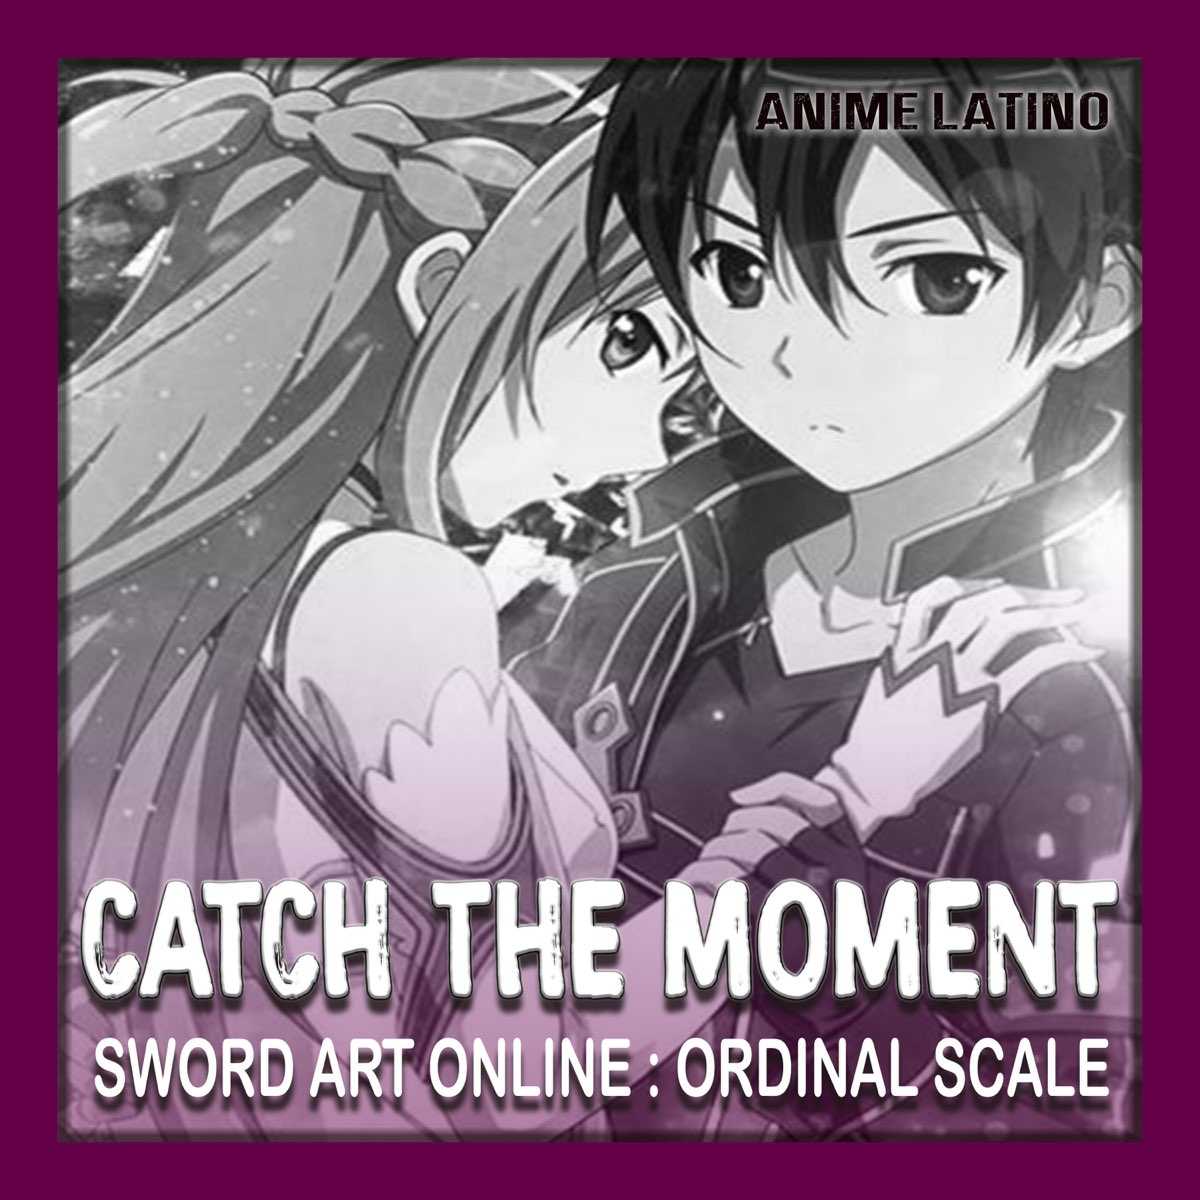 Catch the Moment (Sword Art Online Ordinal Scale) - Single by Anime Latino  on Apple Music